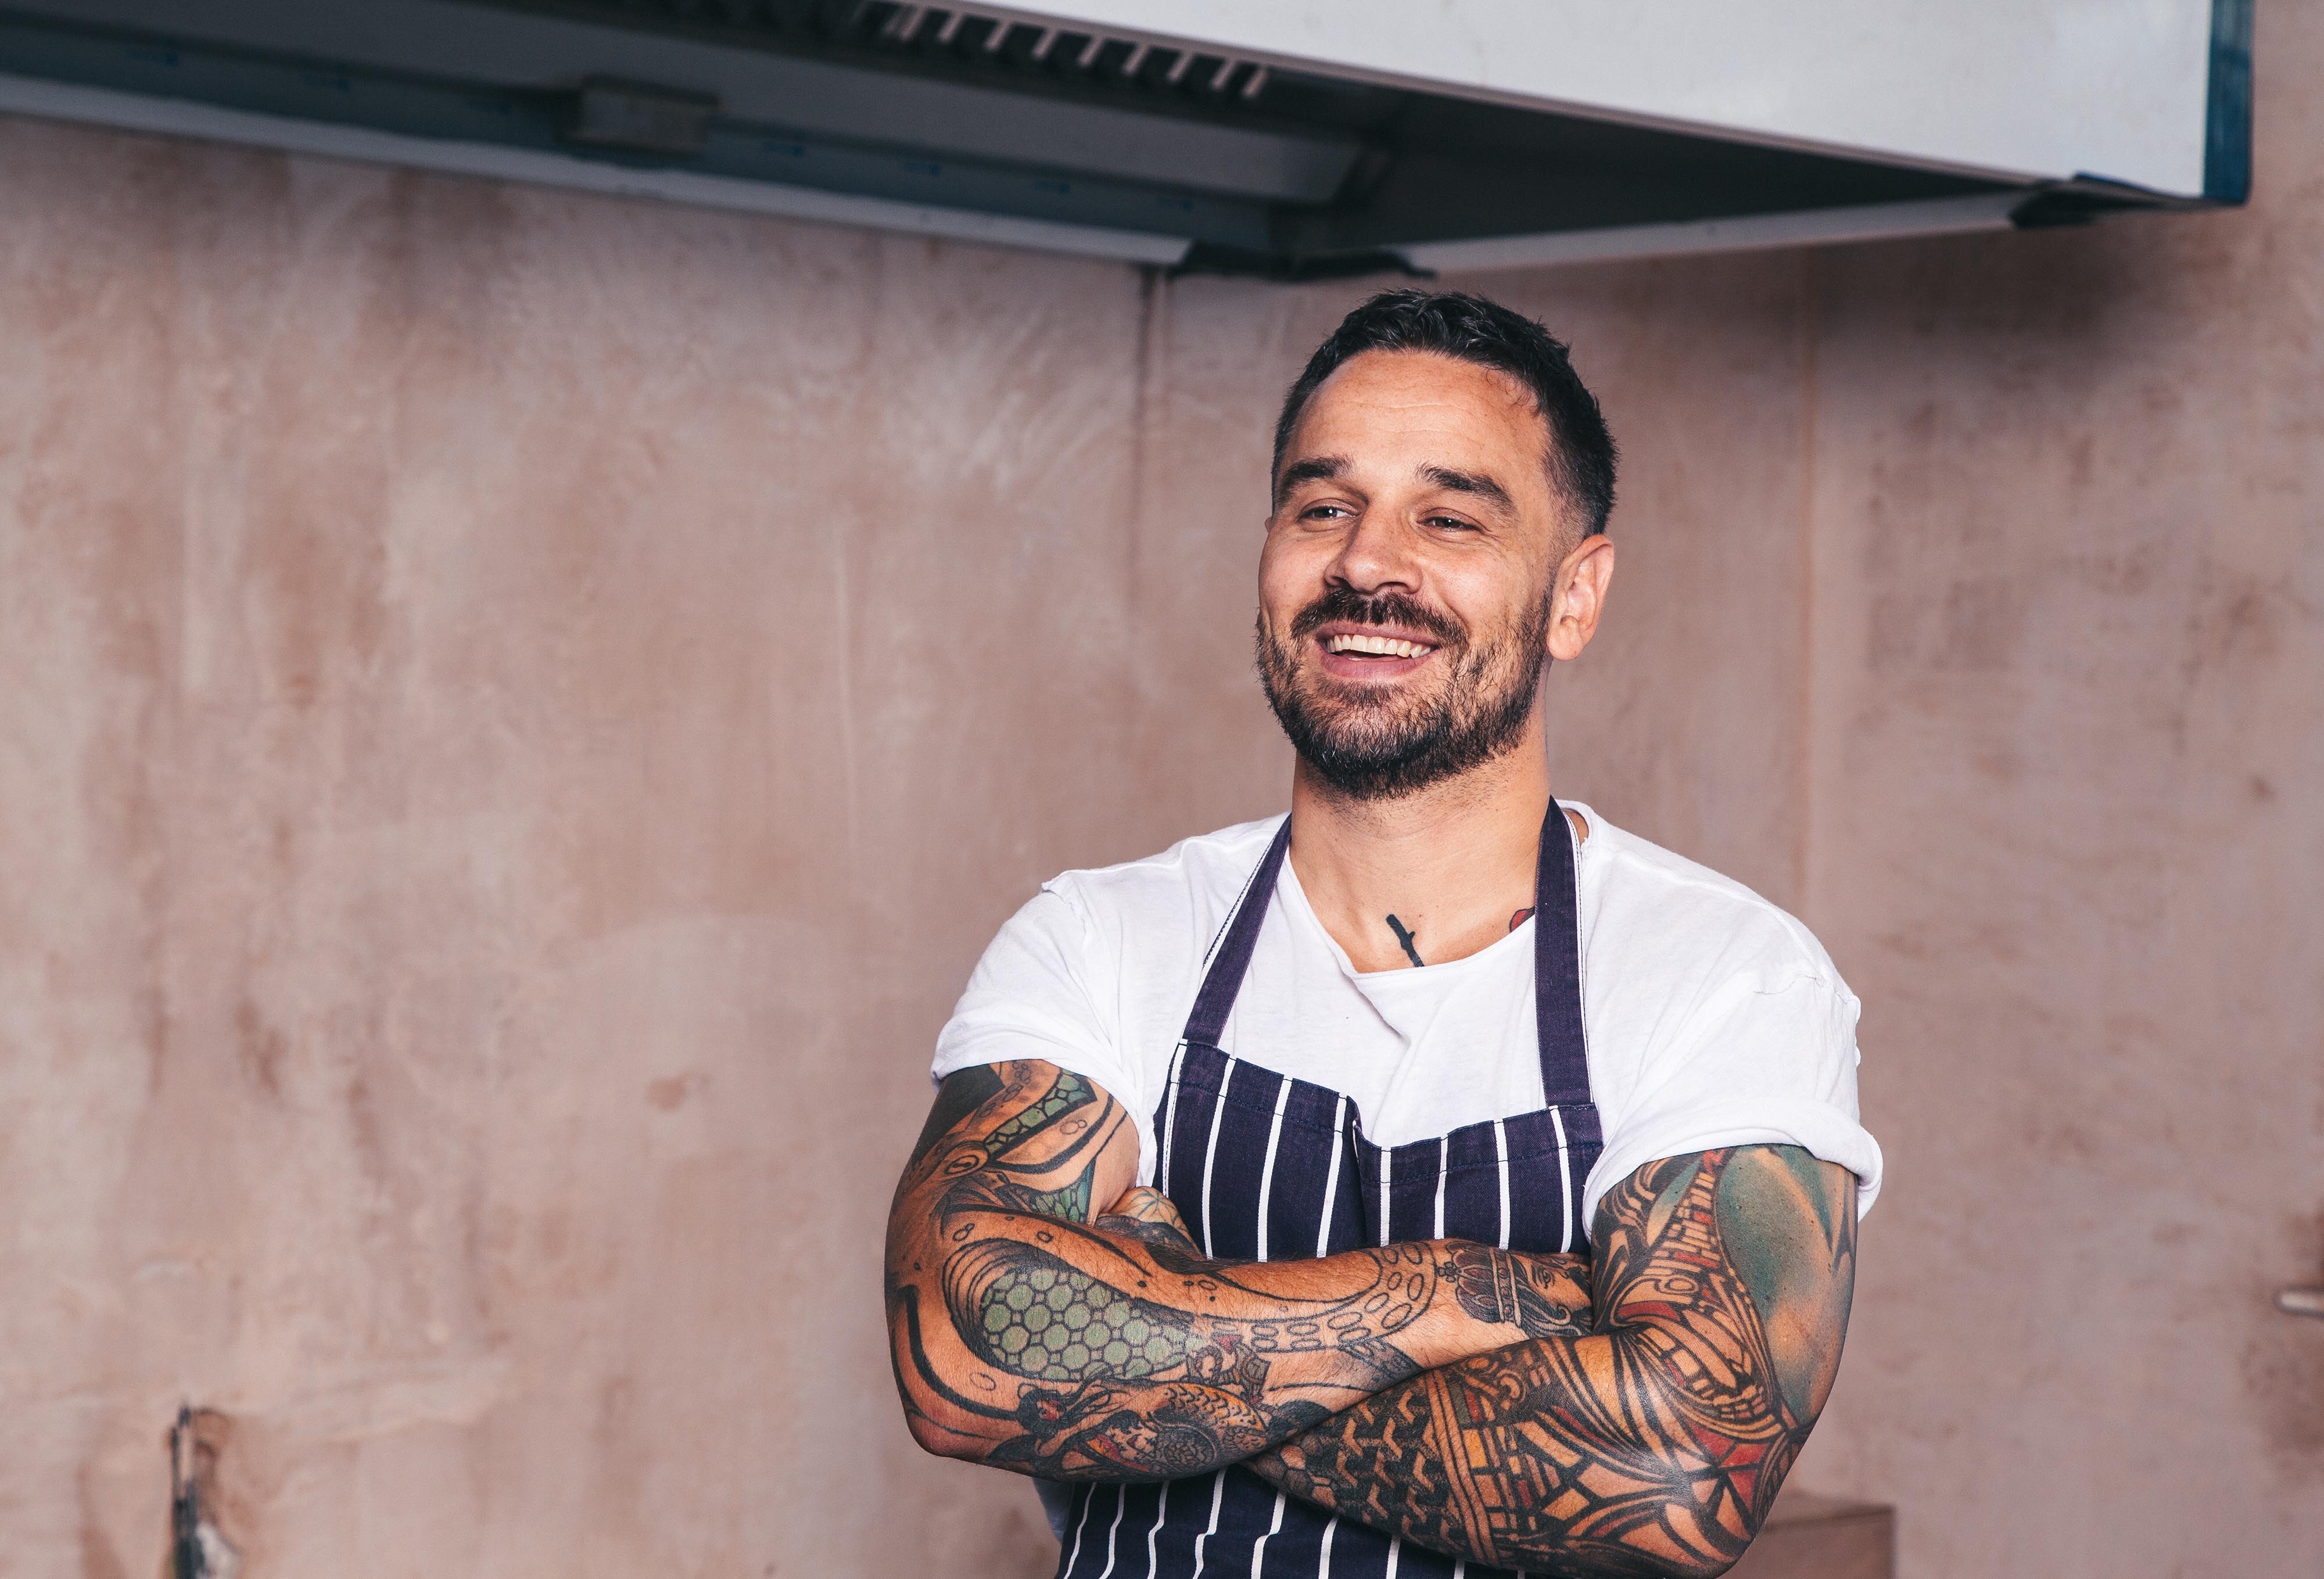 Gary Usher hits £200,000 crowdfund target in just 24 hours